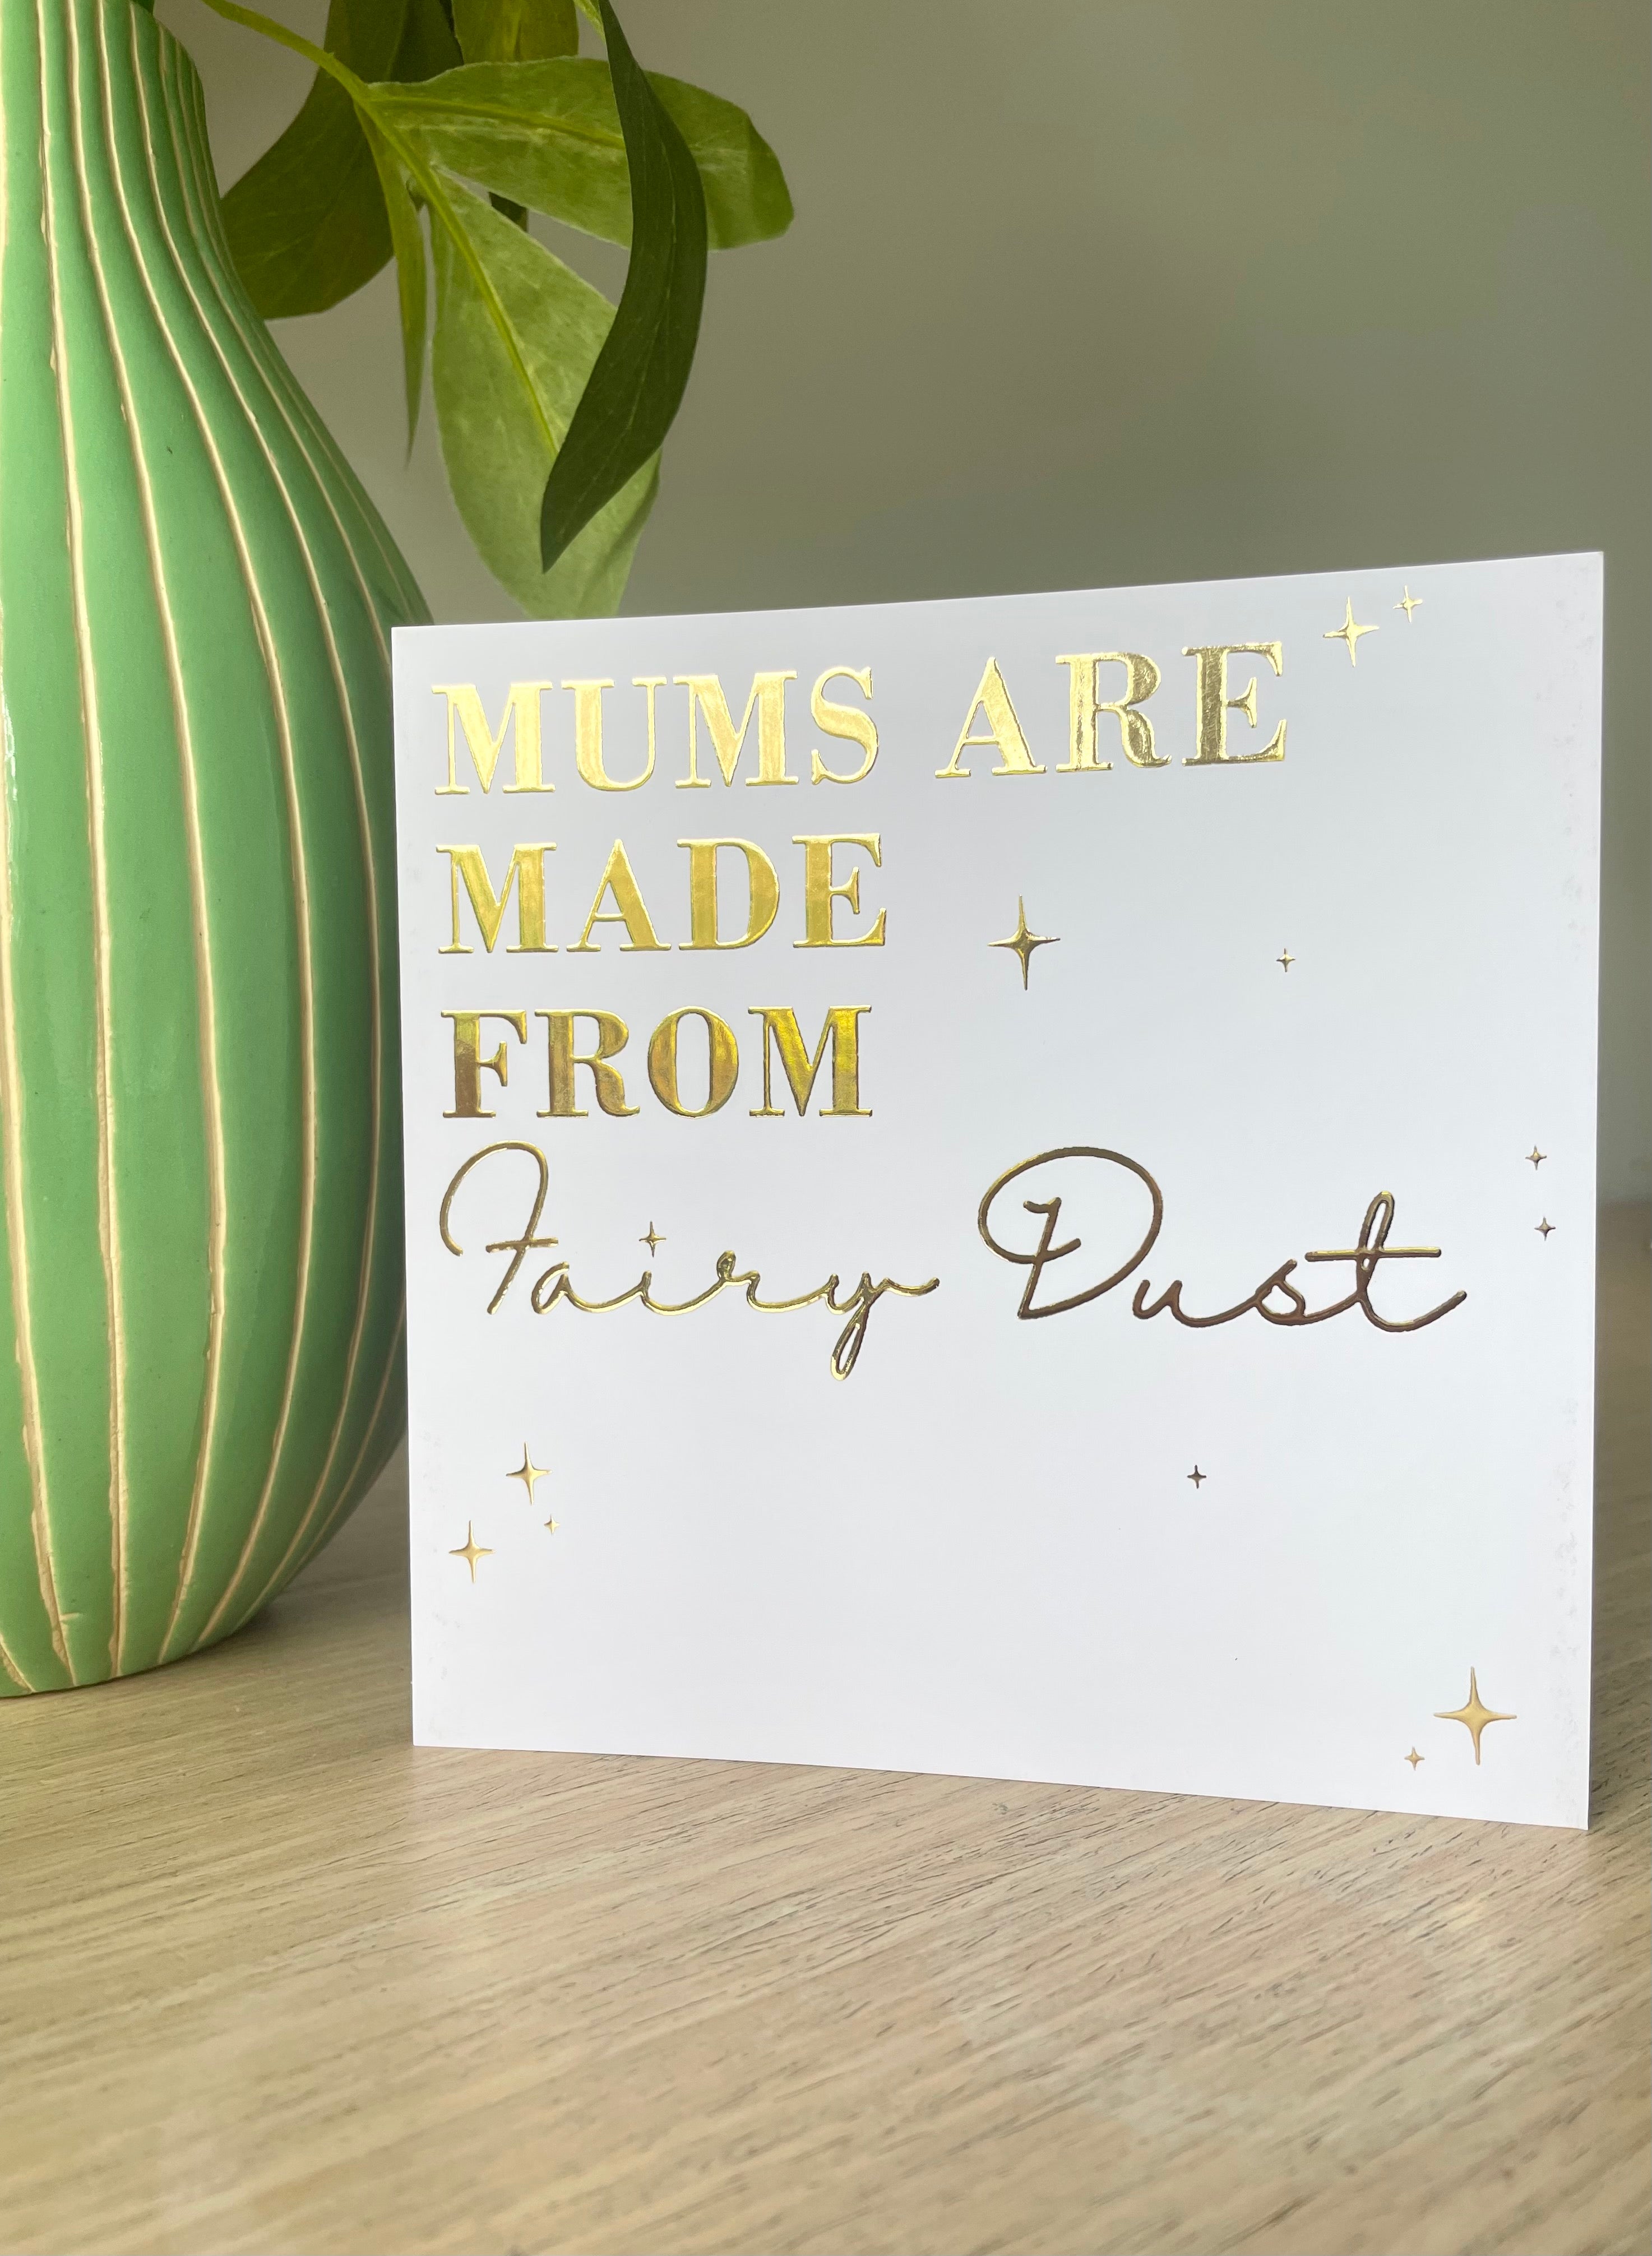 Mums are made from fairy dust!